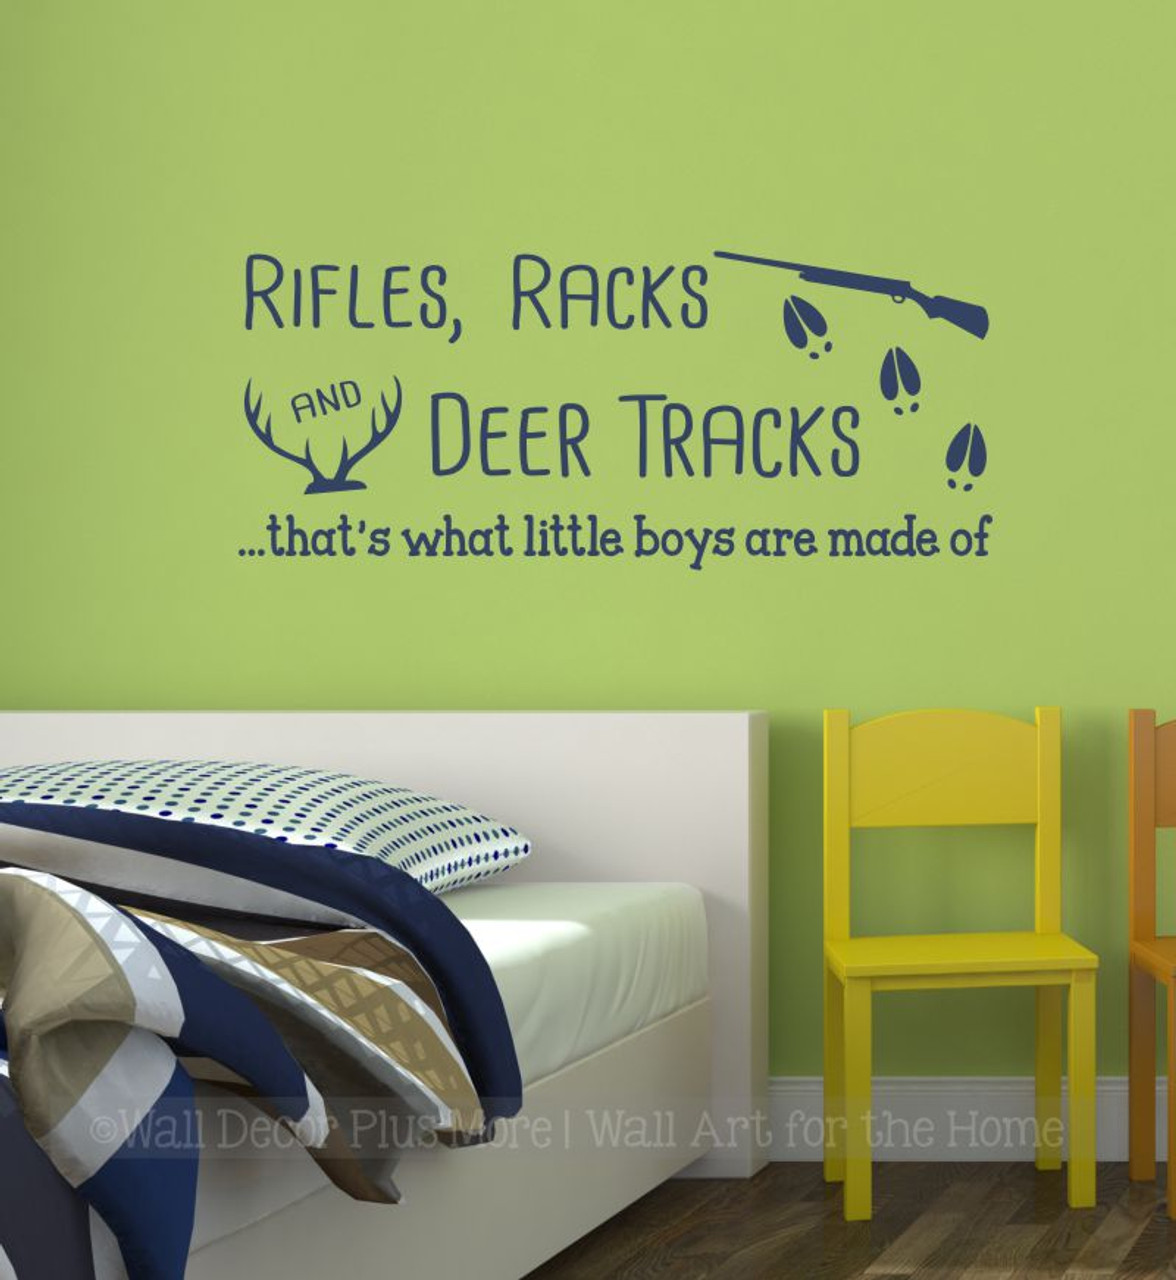 https://cdn11.bigcommerce.com/s-571px4/images/stencil/1280x1280/products/3202/15885/WD1629_Hunting_Bedroom_Wall_Decal_Sticker_Rifles_Rack_Little_Boys_Made_Of_Quote_Deep_Blue__62159.1571765523.jpg?c=2